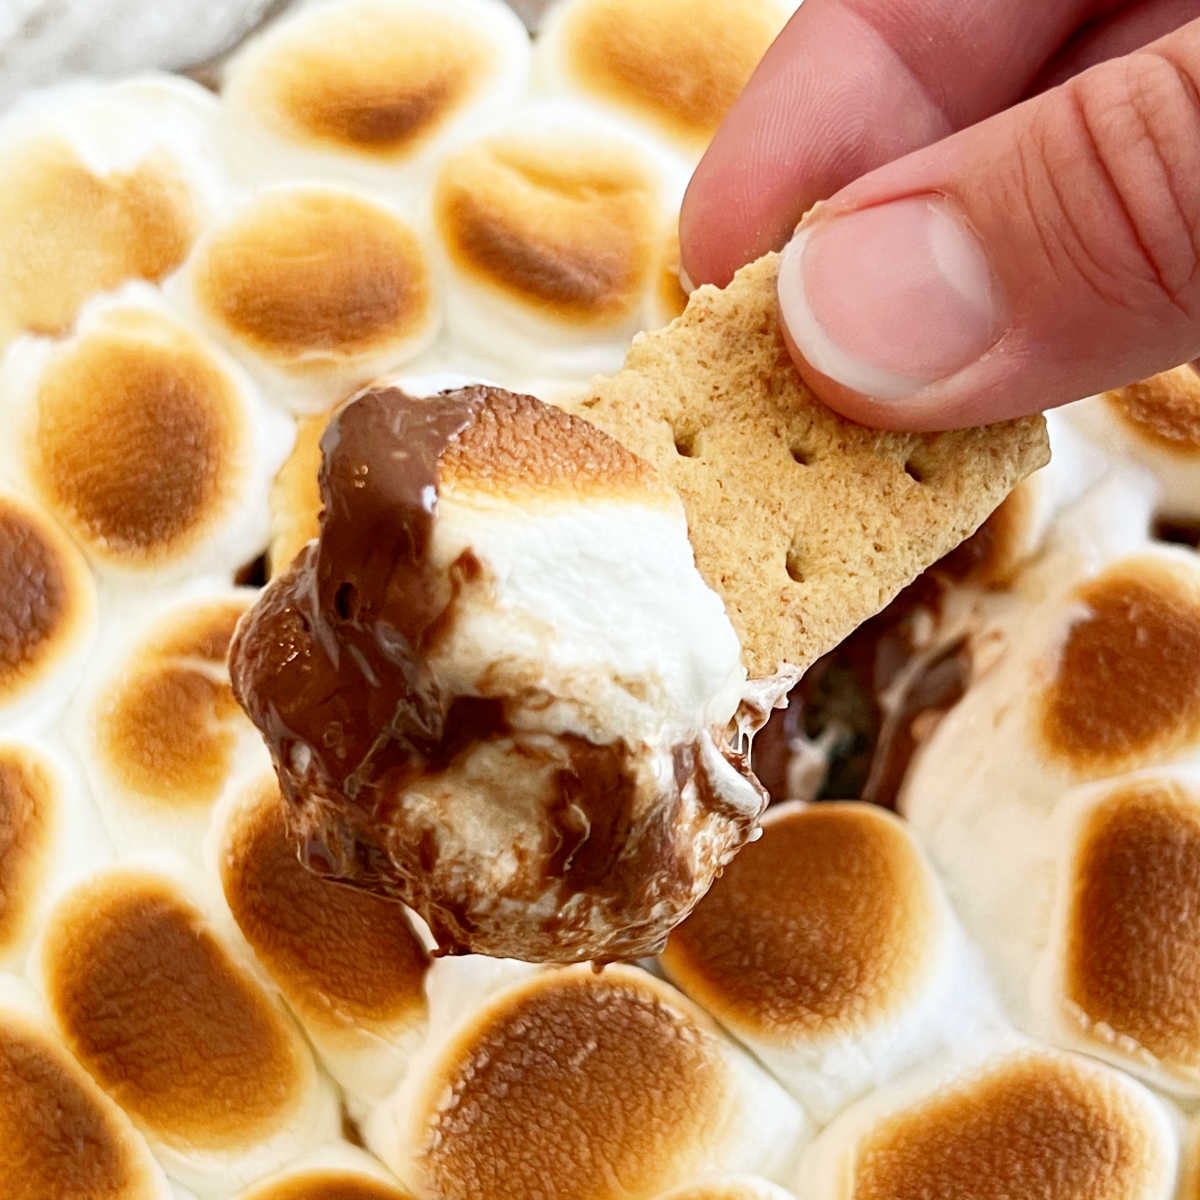 Best tools to make s'mores in the oven, microwave, fire and more